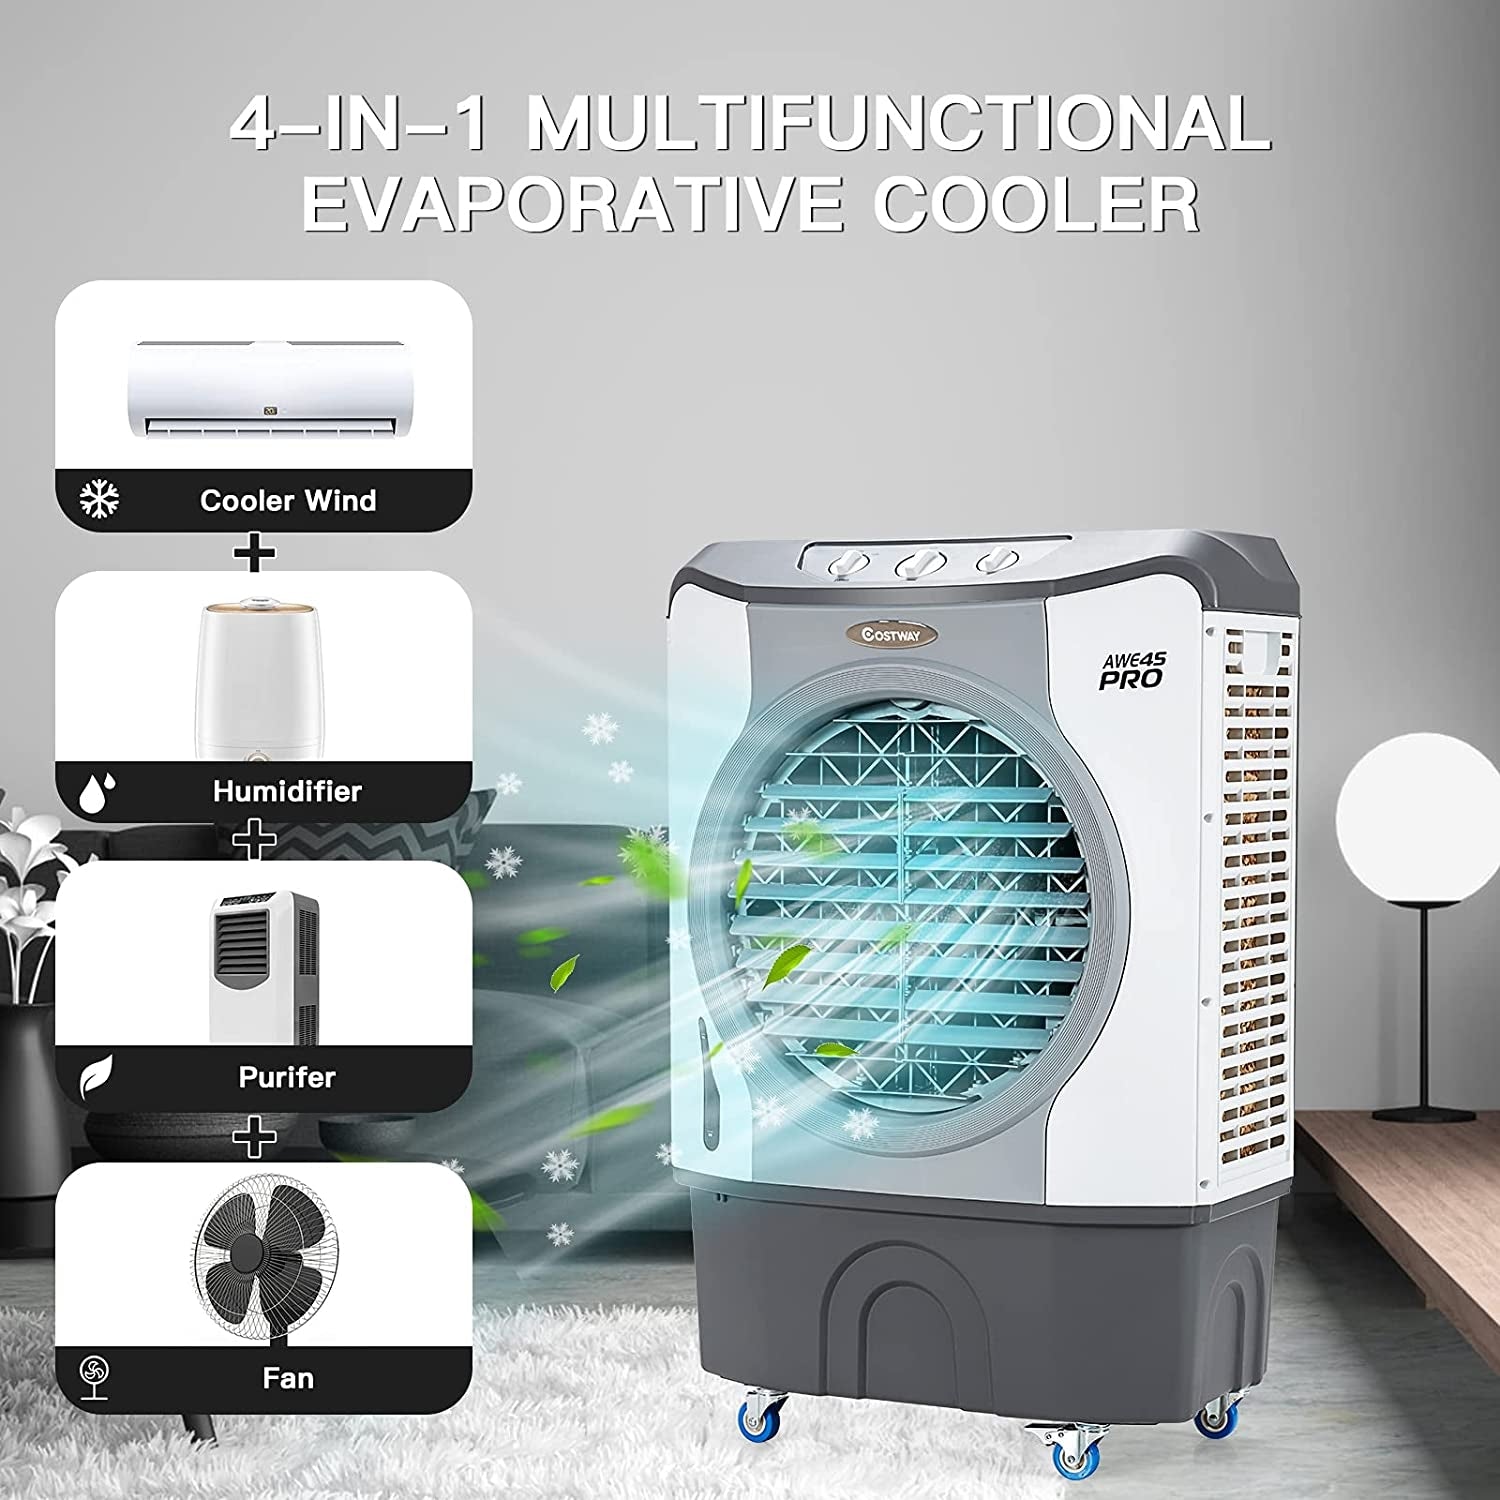 Fan, Humidifier and Purifier 4 in 1: Humidifier, and Purifier: Unleash the power of water evaporation as our innovative air cooler not only cools the air but also increases humidity, delivering a refreshing breeze that surpasses traditional fans. Enhance the cooling effect by adding ice cubes to the generous water tank, while the advanced honeycombed filters ensure a continuous flow of clean, fresh air.